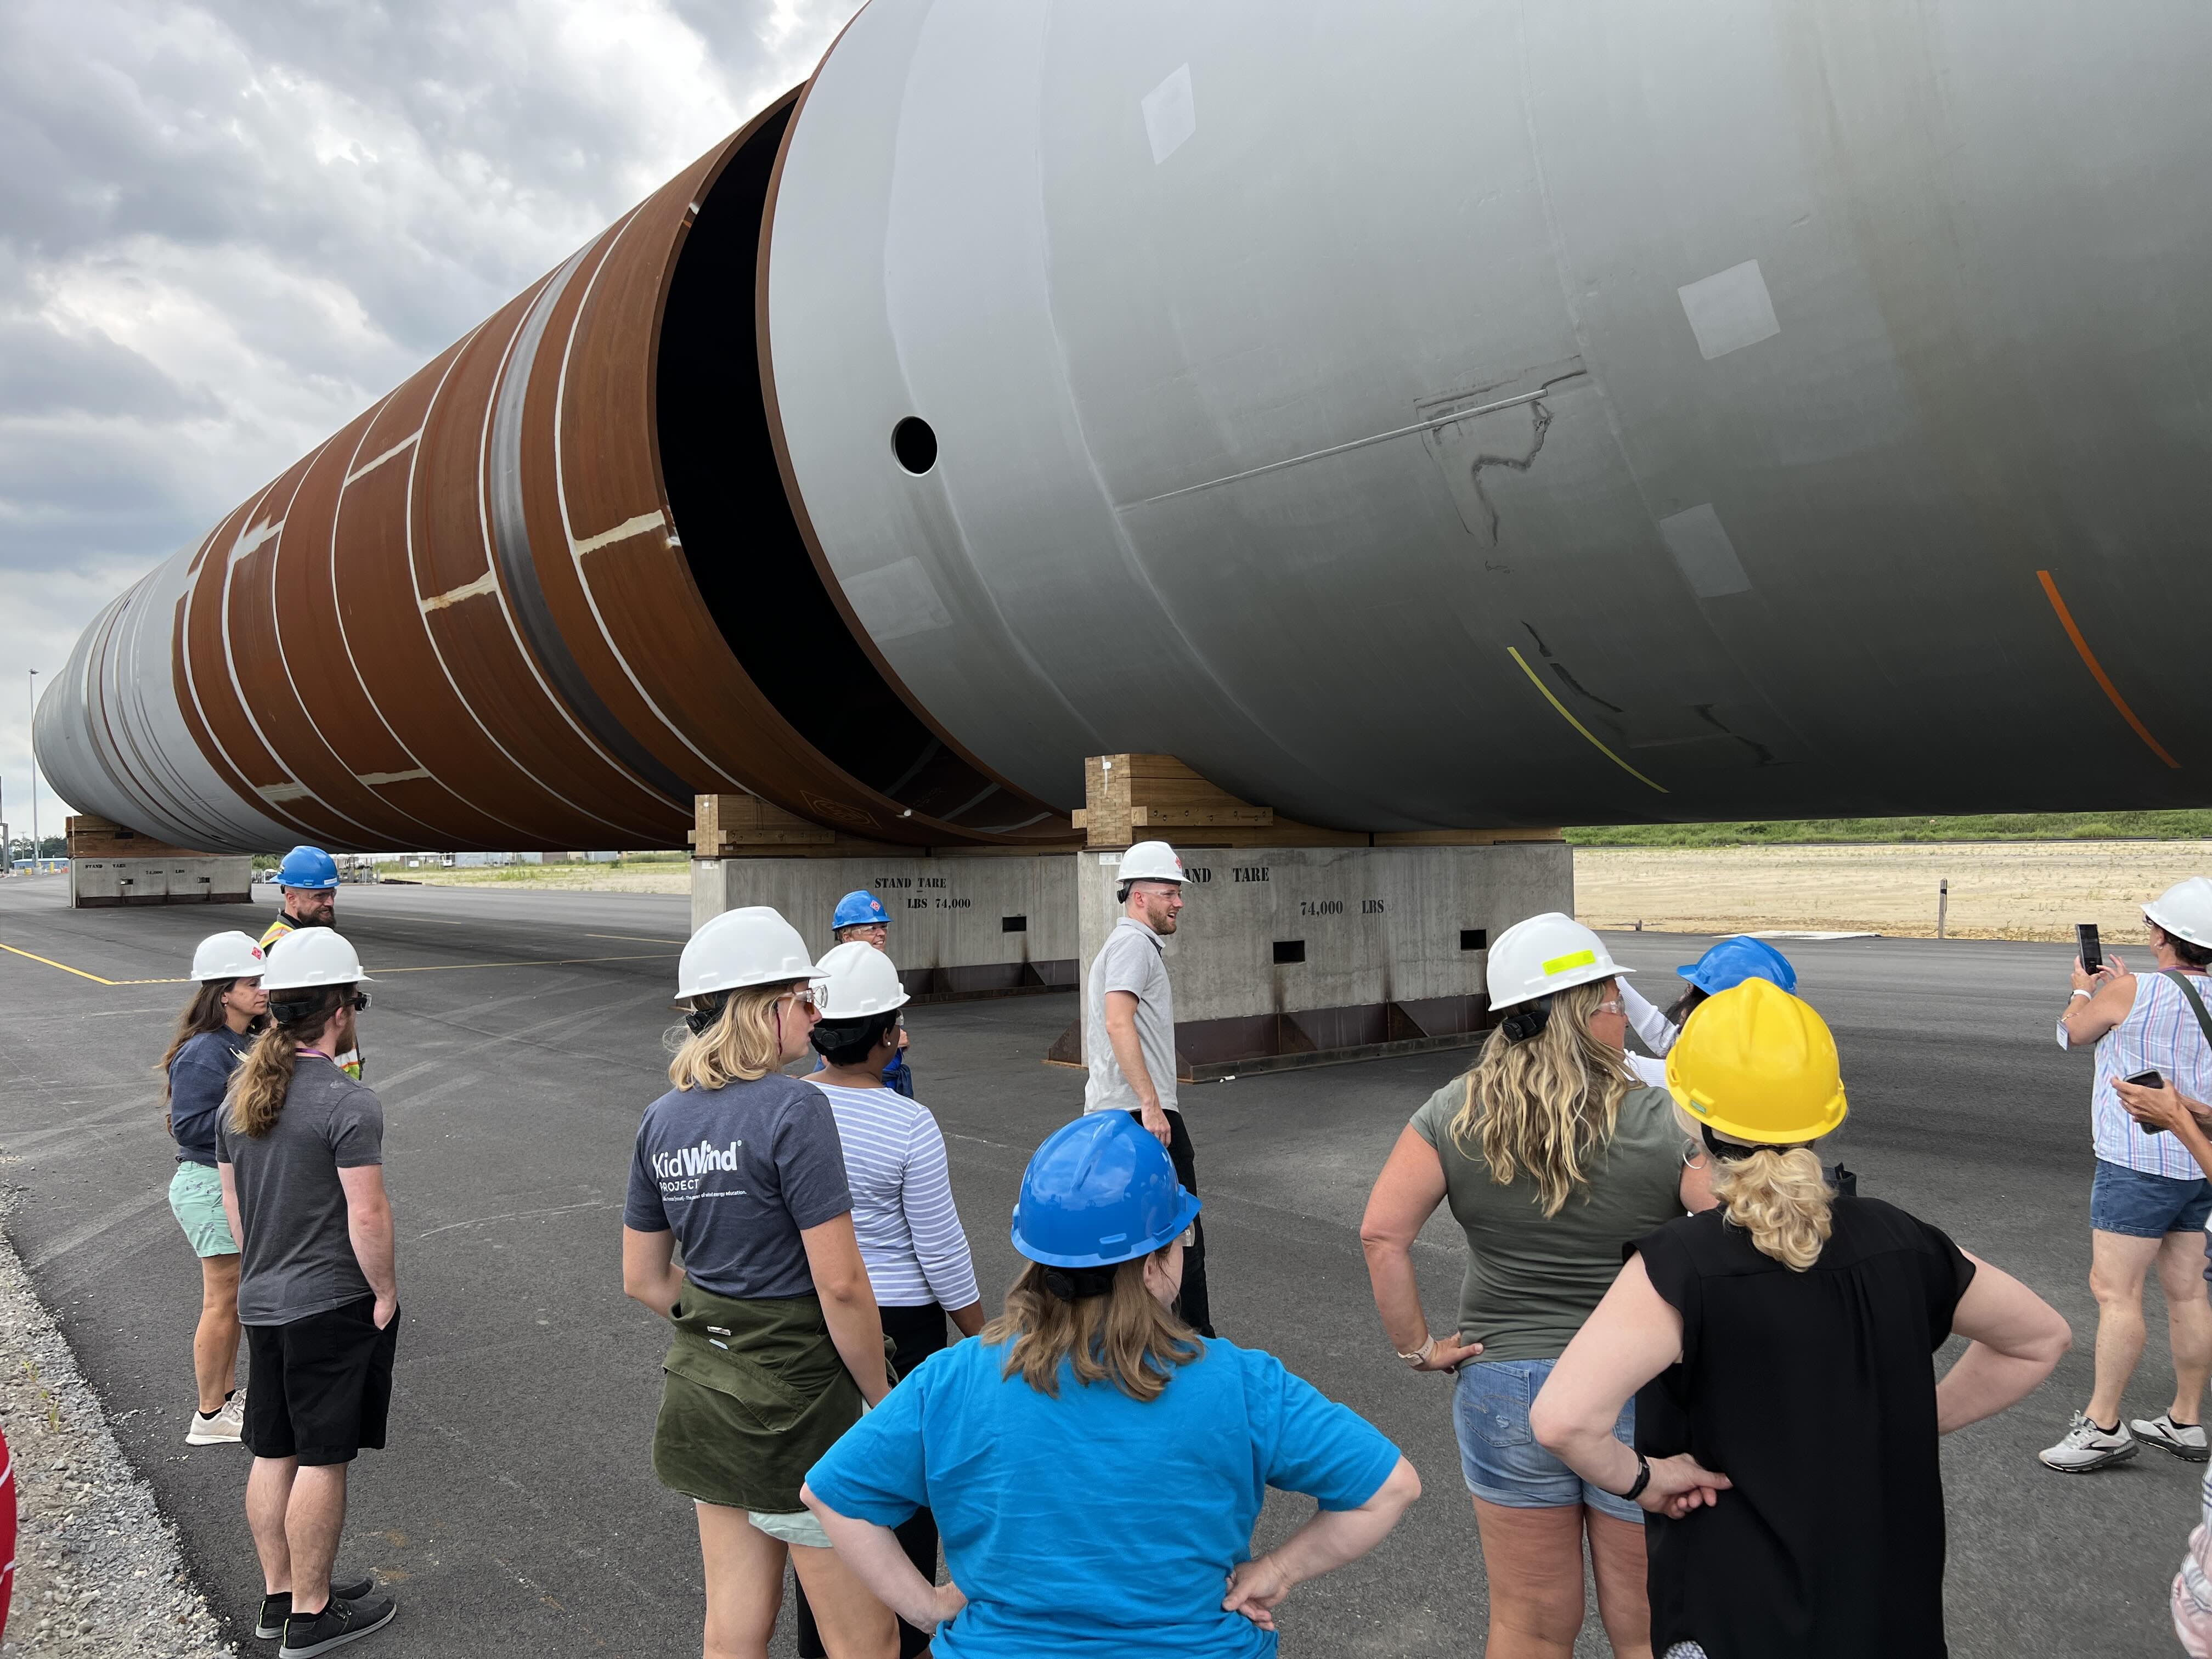 Students stand in front of monopile foundations for offshore wind turbinestour at REcharge Academy in Paulsboro, New Jersey,Students stand in front of monopile foundations for offshore wind turbinestour at REcharge Academy in Paulsboro, New Jersey